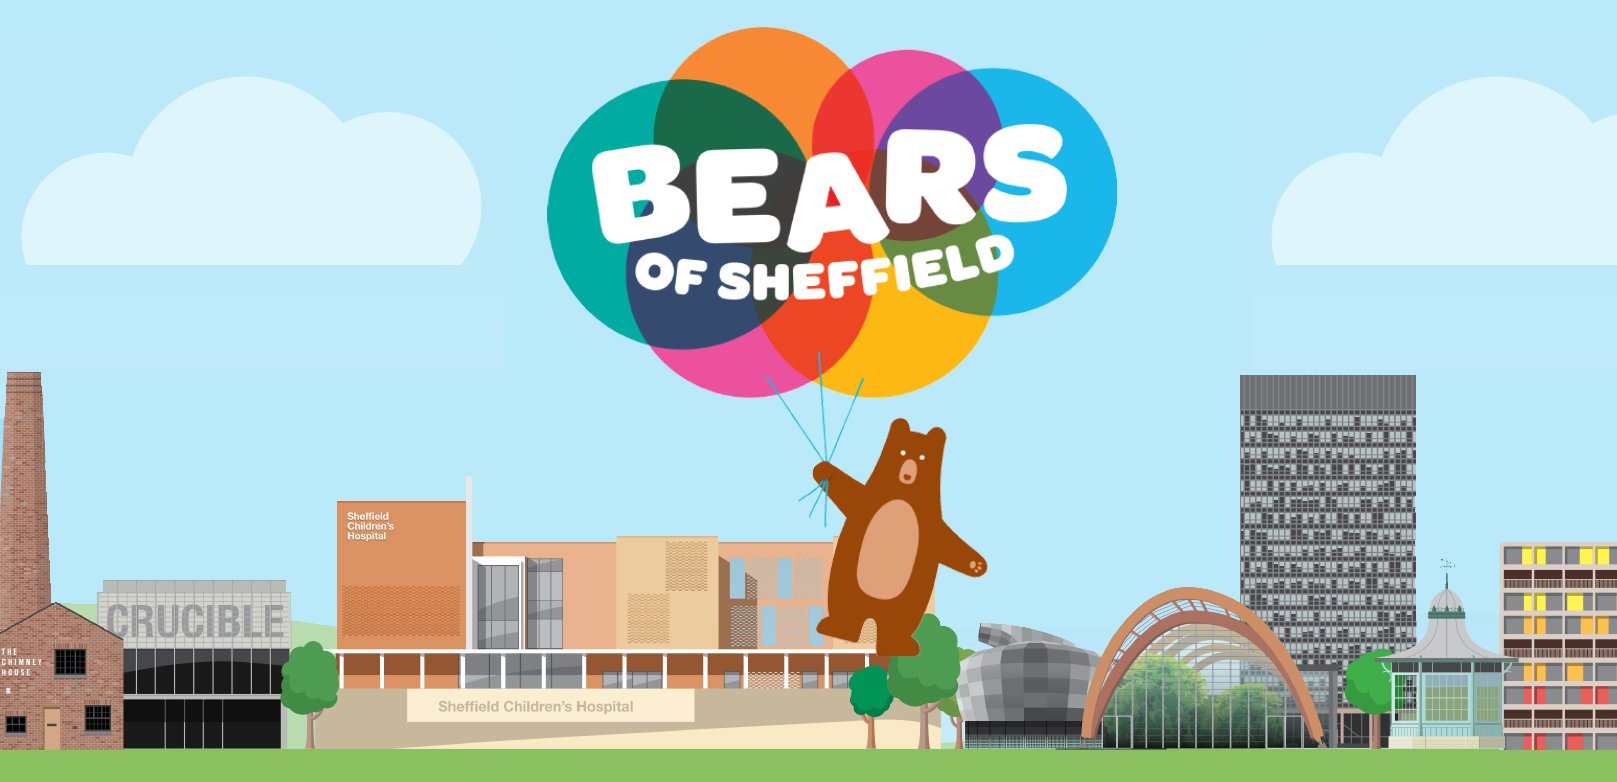 We're backing the Bears of Sheffield